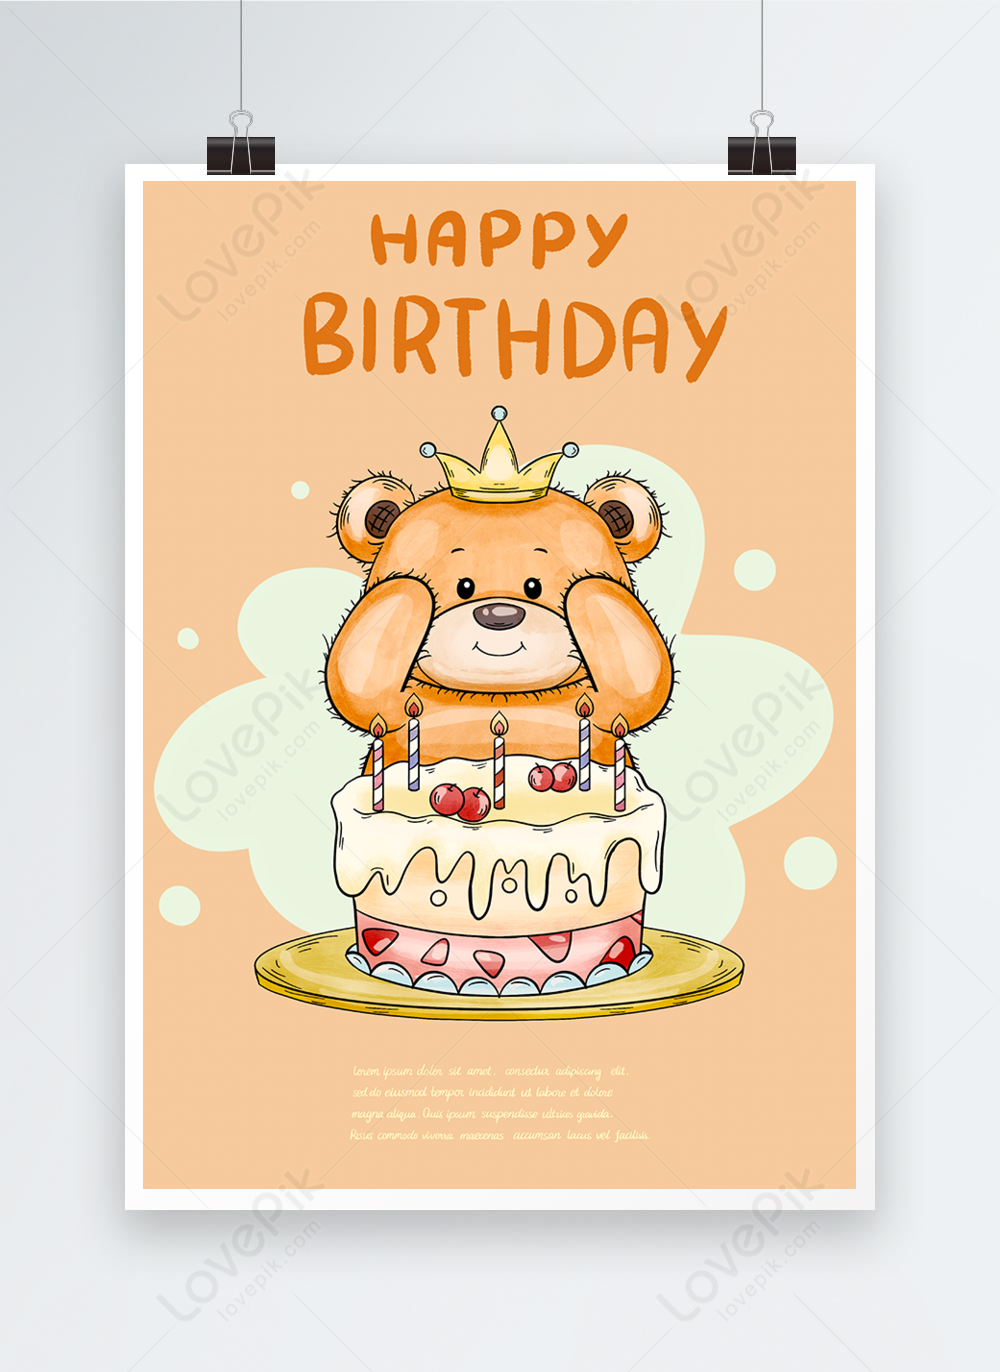 Hand drawn style birthday bear party poster template image_picture free ...